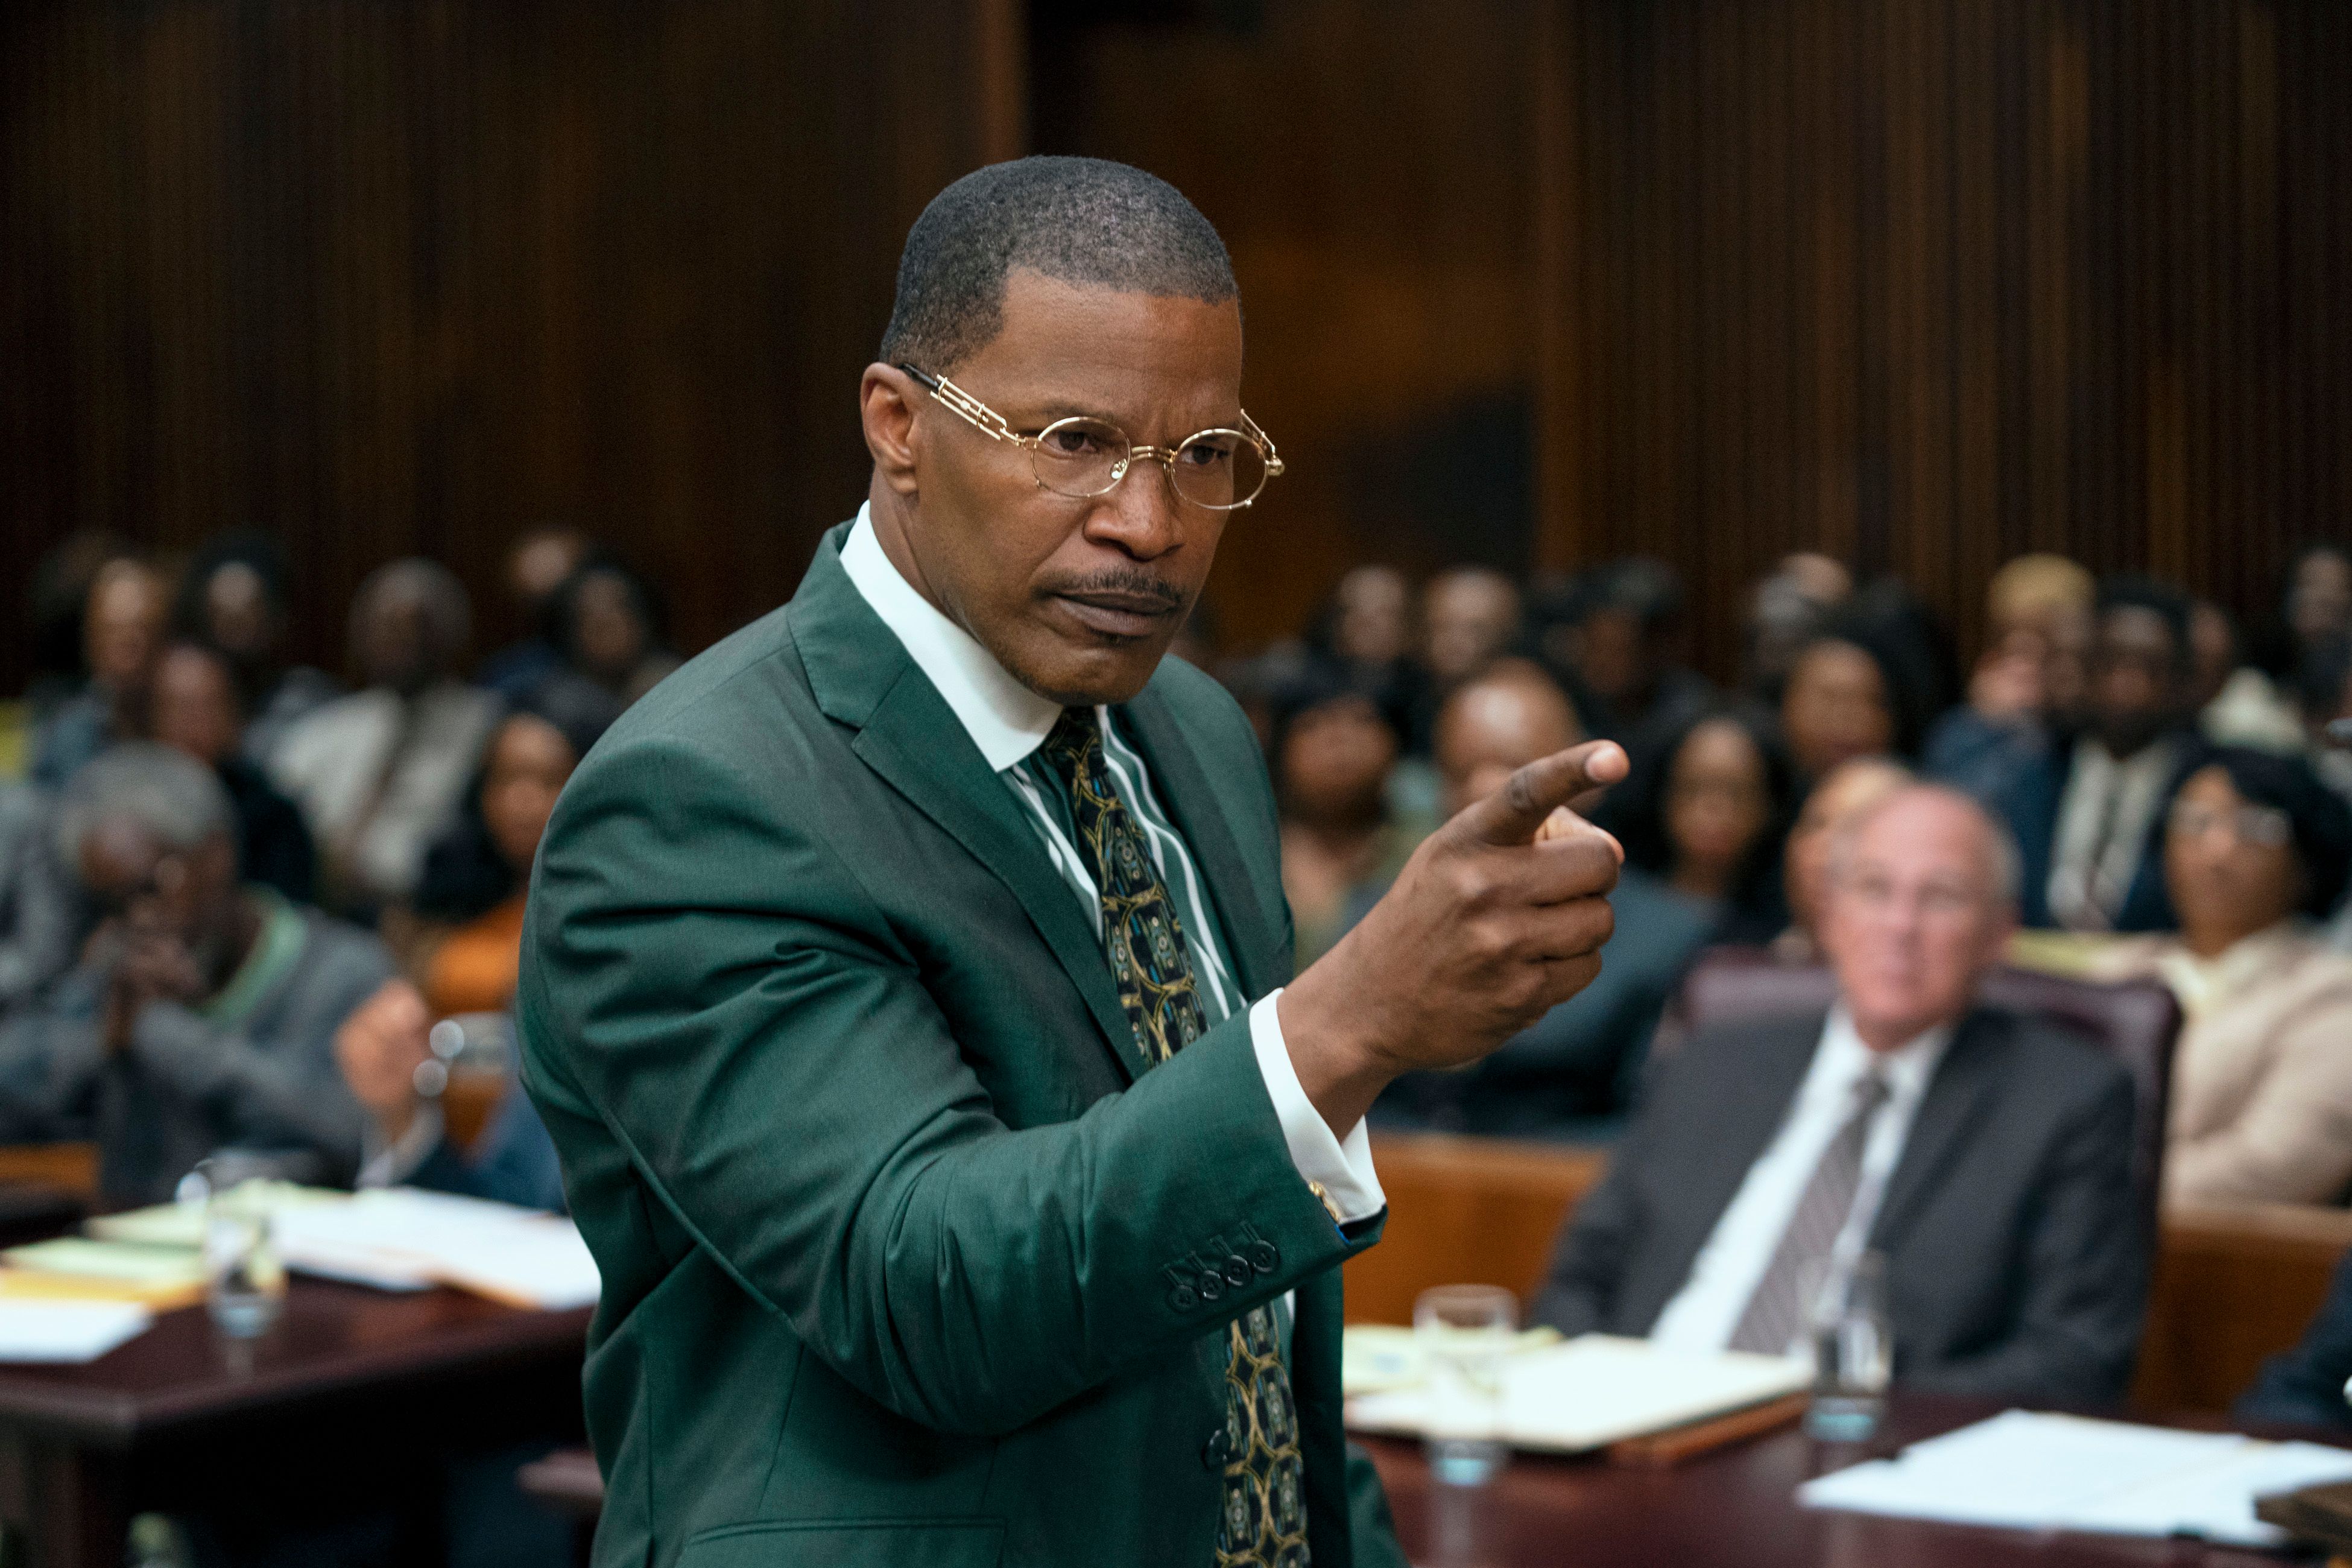 Jamie Foxx as Willie E. Gary in a court room in The Burial